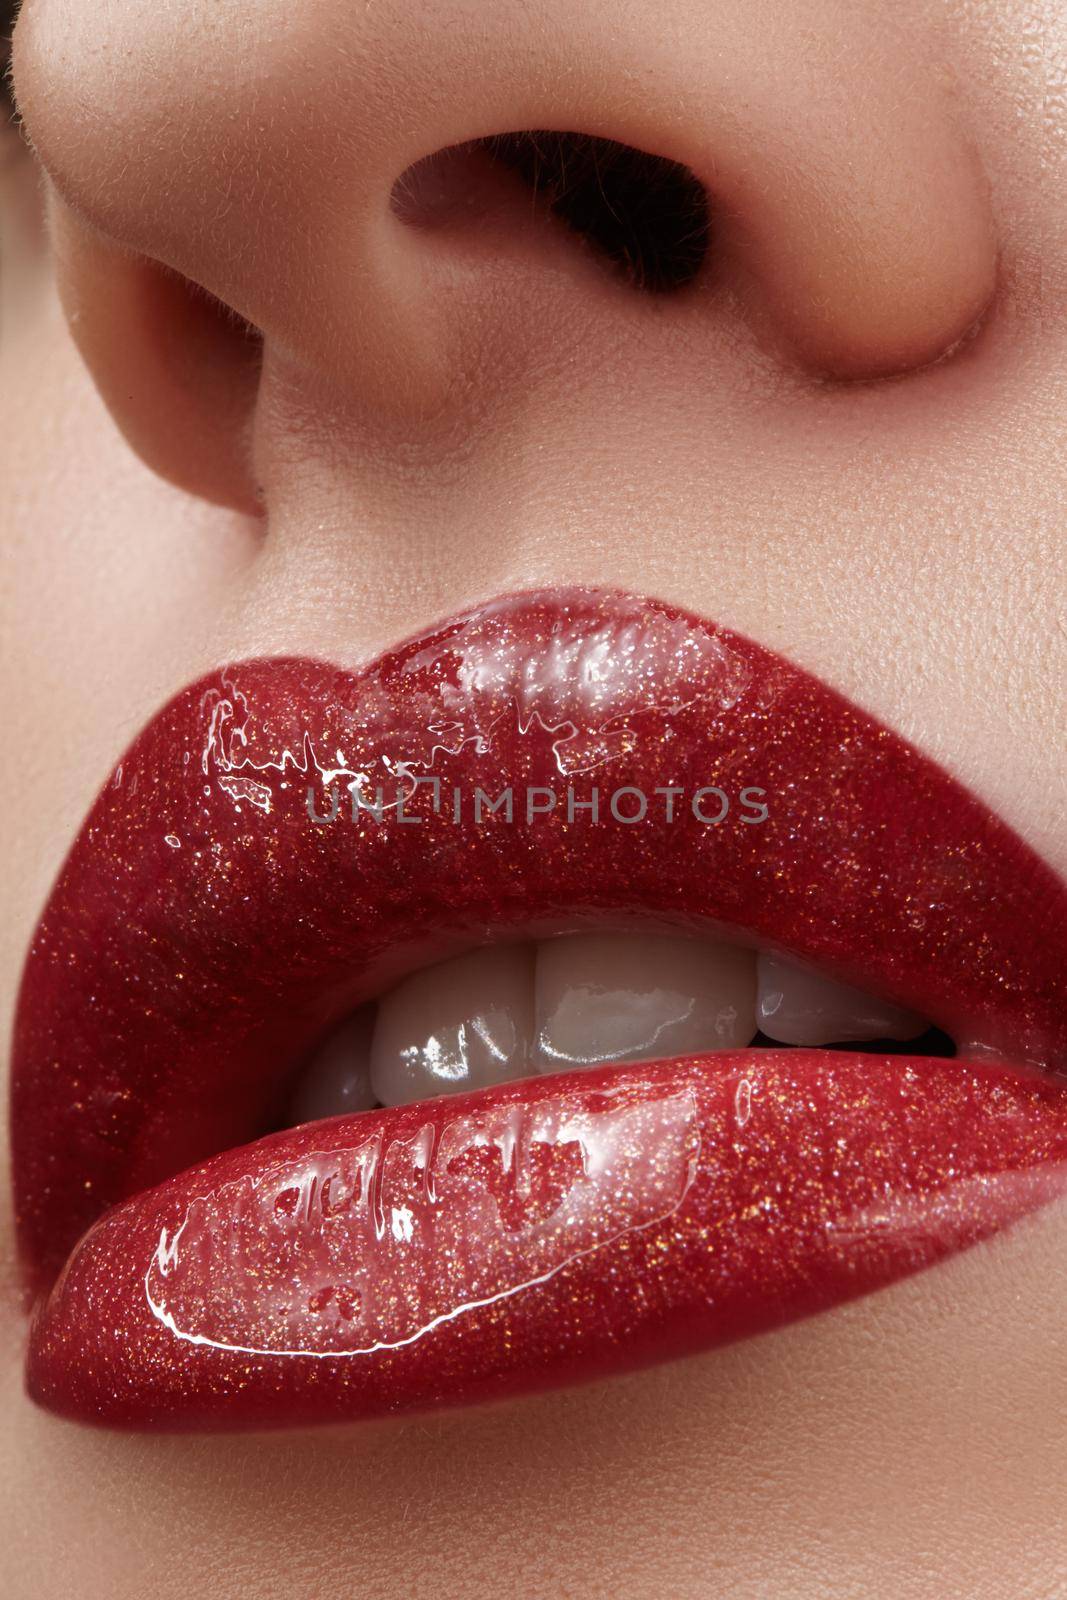 Close-up of female lips with bright makeup. Macro of woman's face. Fashion lip make-up with red gloss.Red lipgloss makeup on full female lips